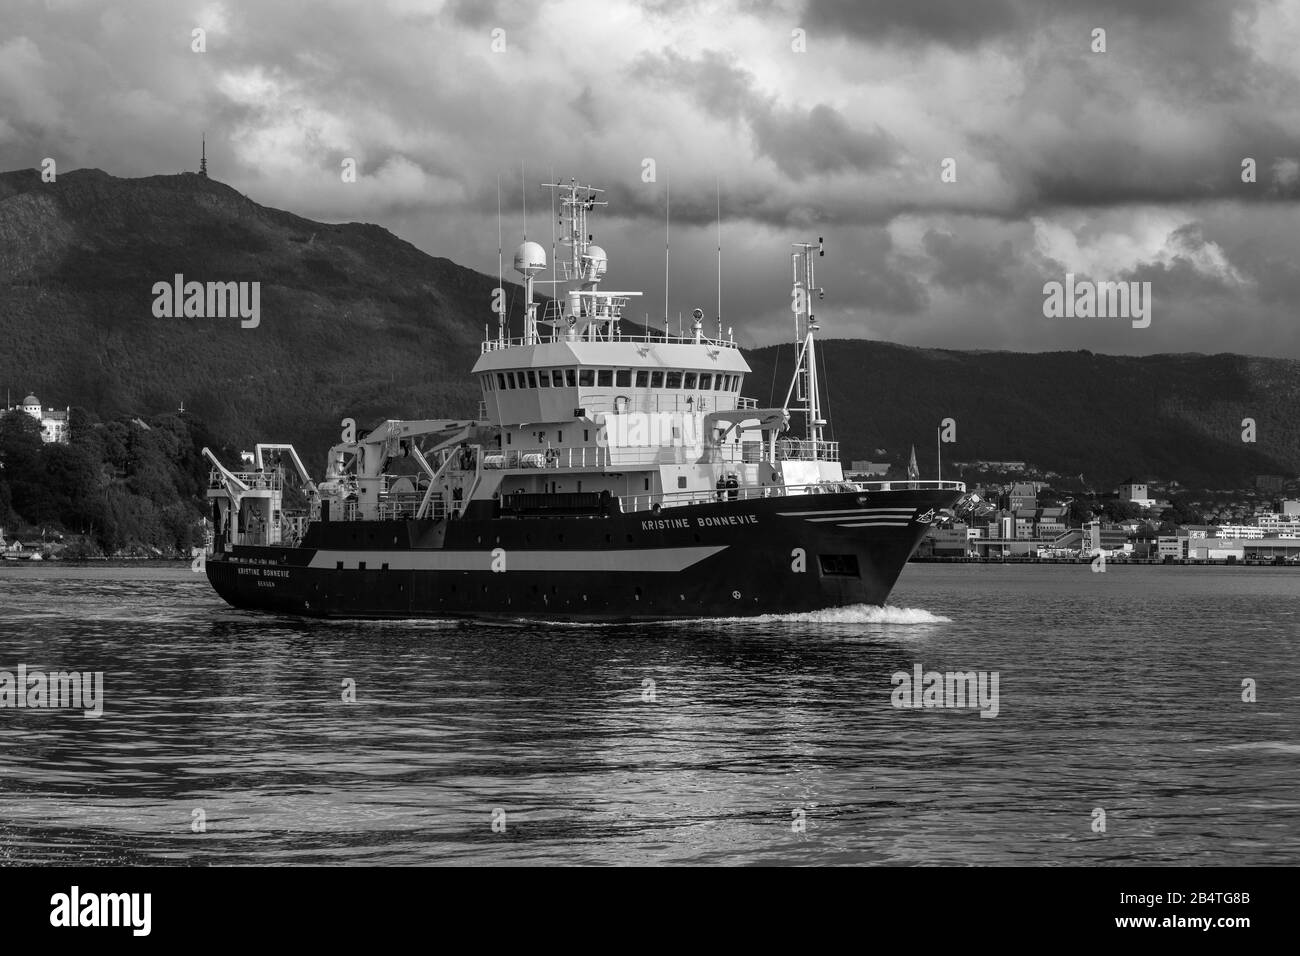 Ocean research vessel Kristine Bonnevie departing from the port of Bergen, Norway. Owned by the University of Bergen, Institute of Marine Research. A Stock Photo